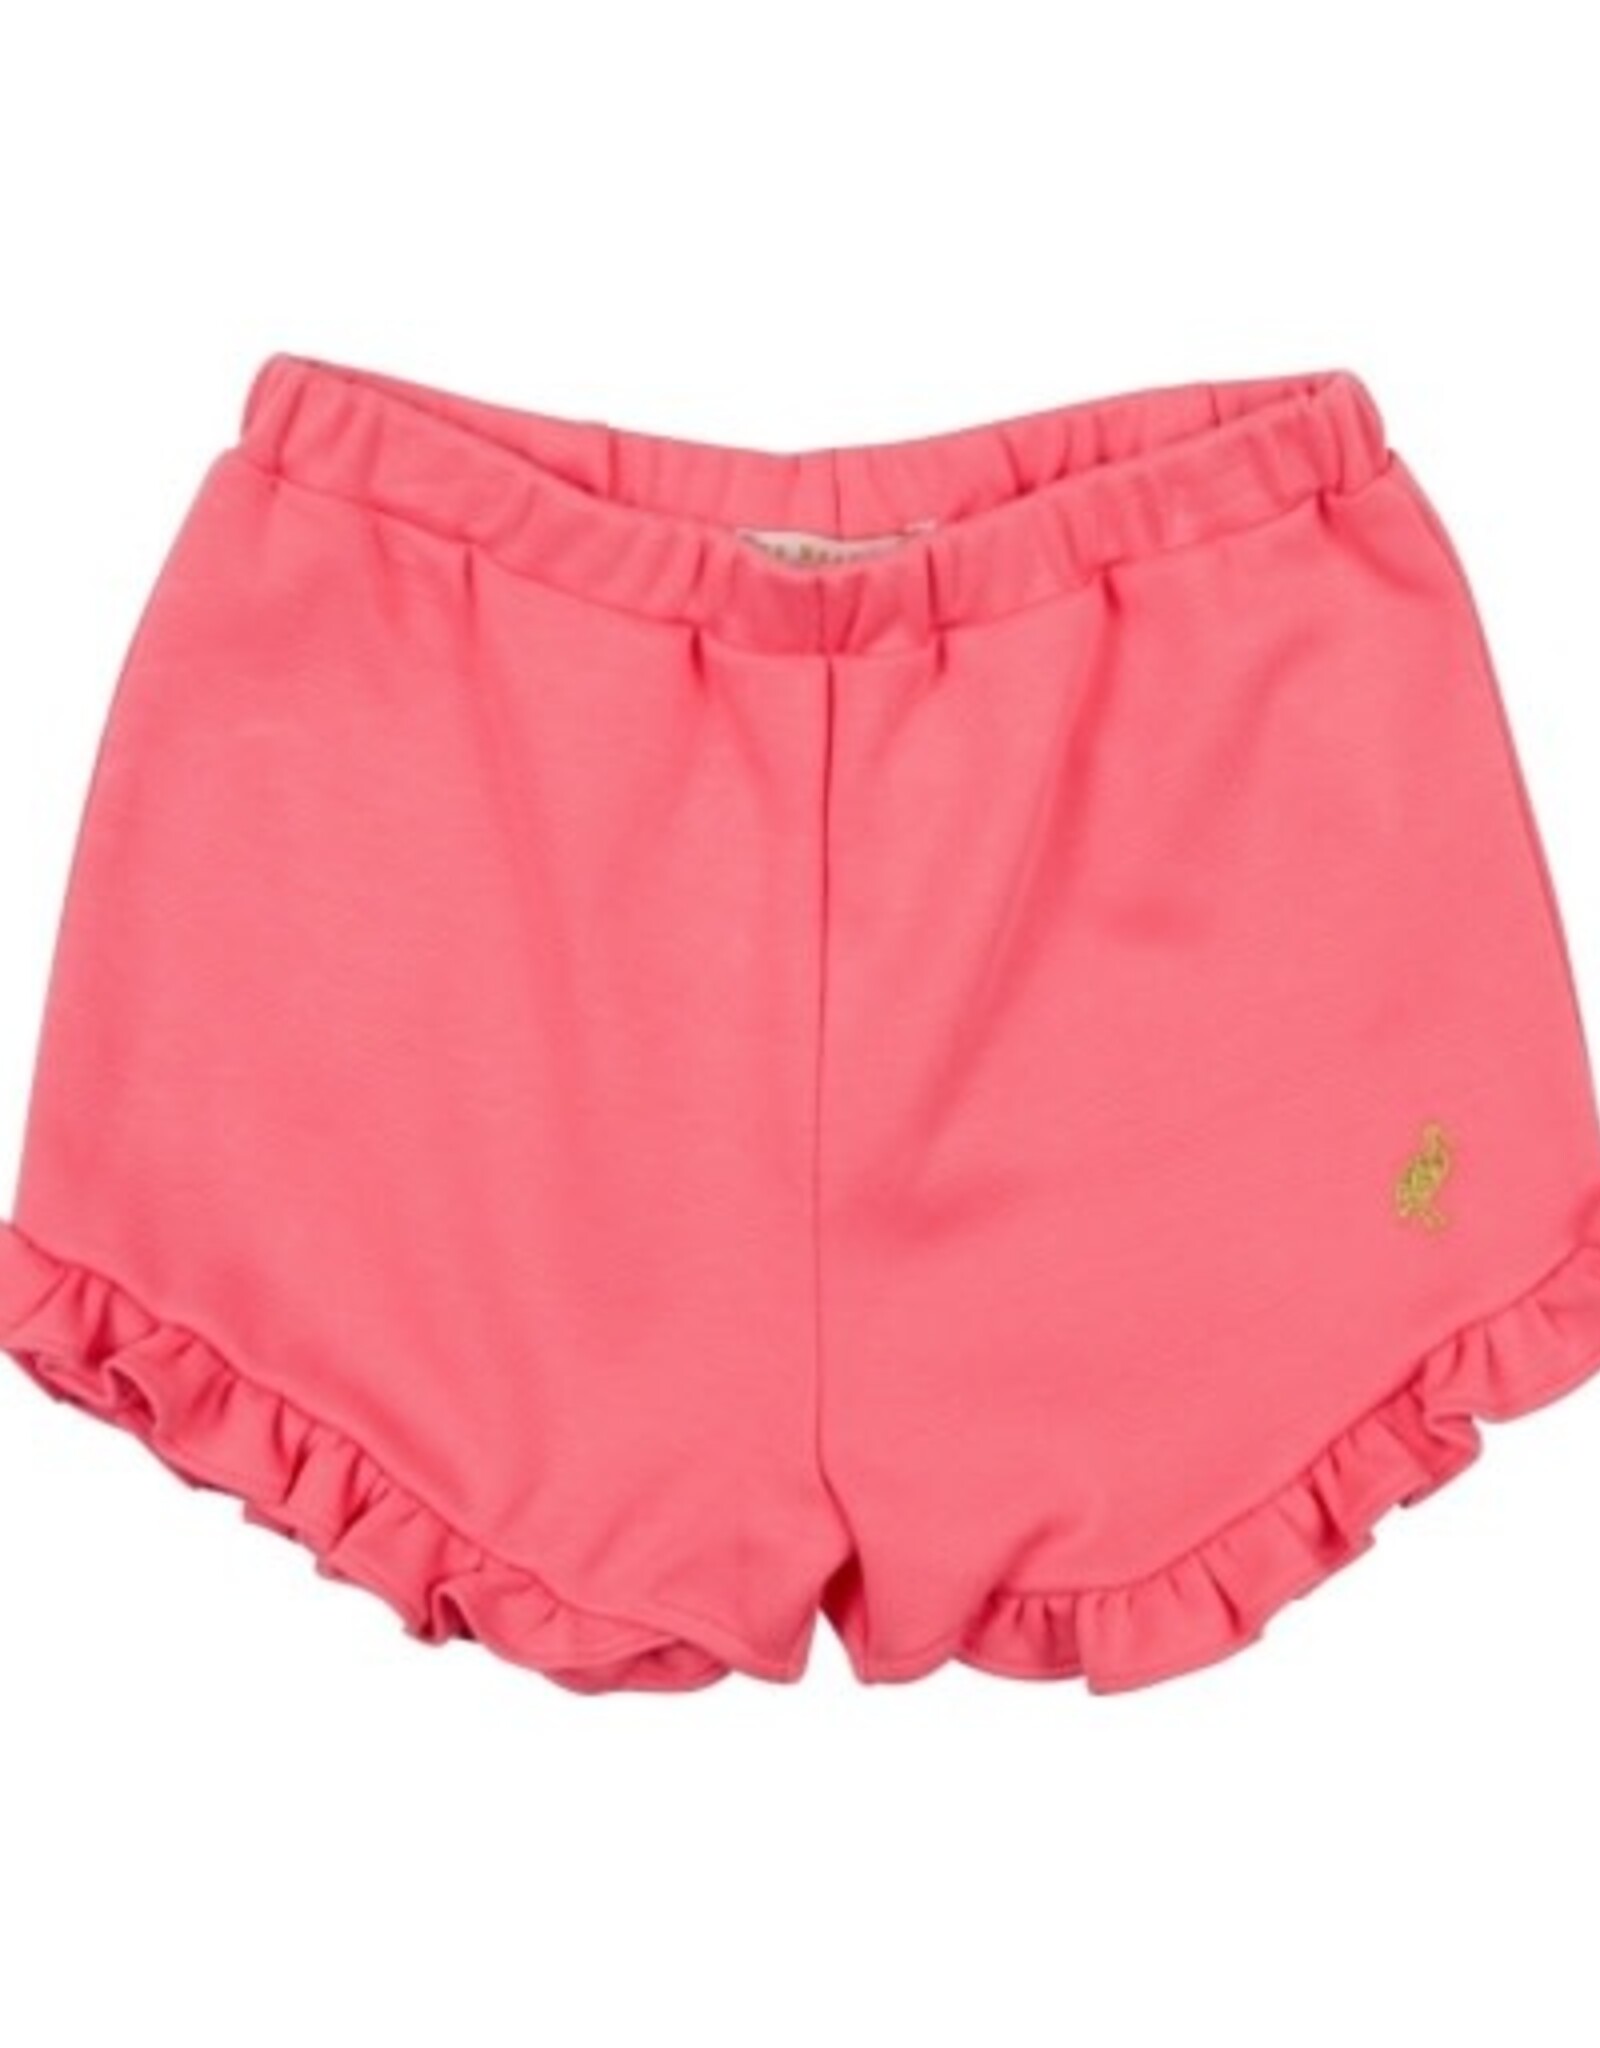 The Beaufort Bonnet Company Shelby Anne Shorts, Parrot Cay Coral